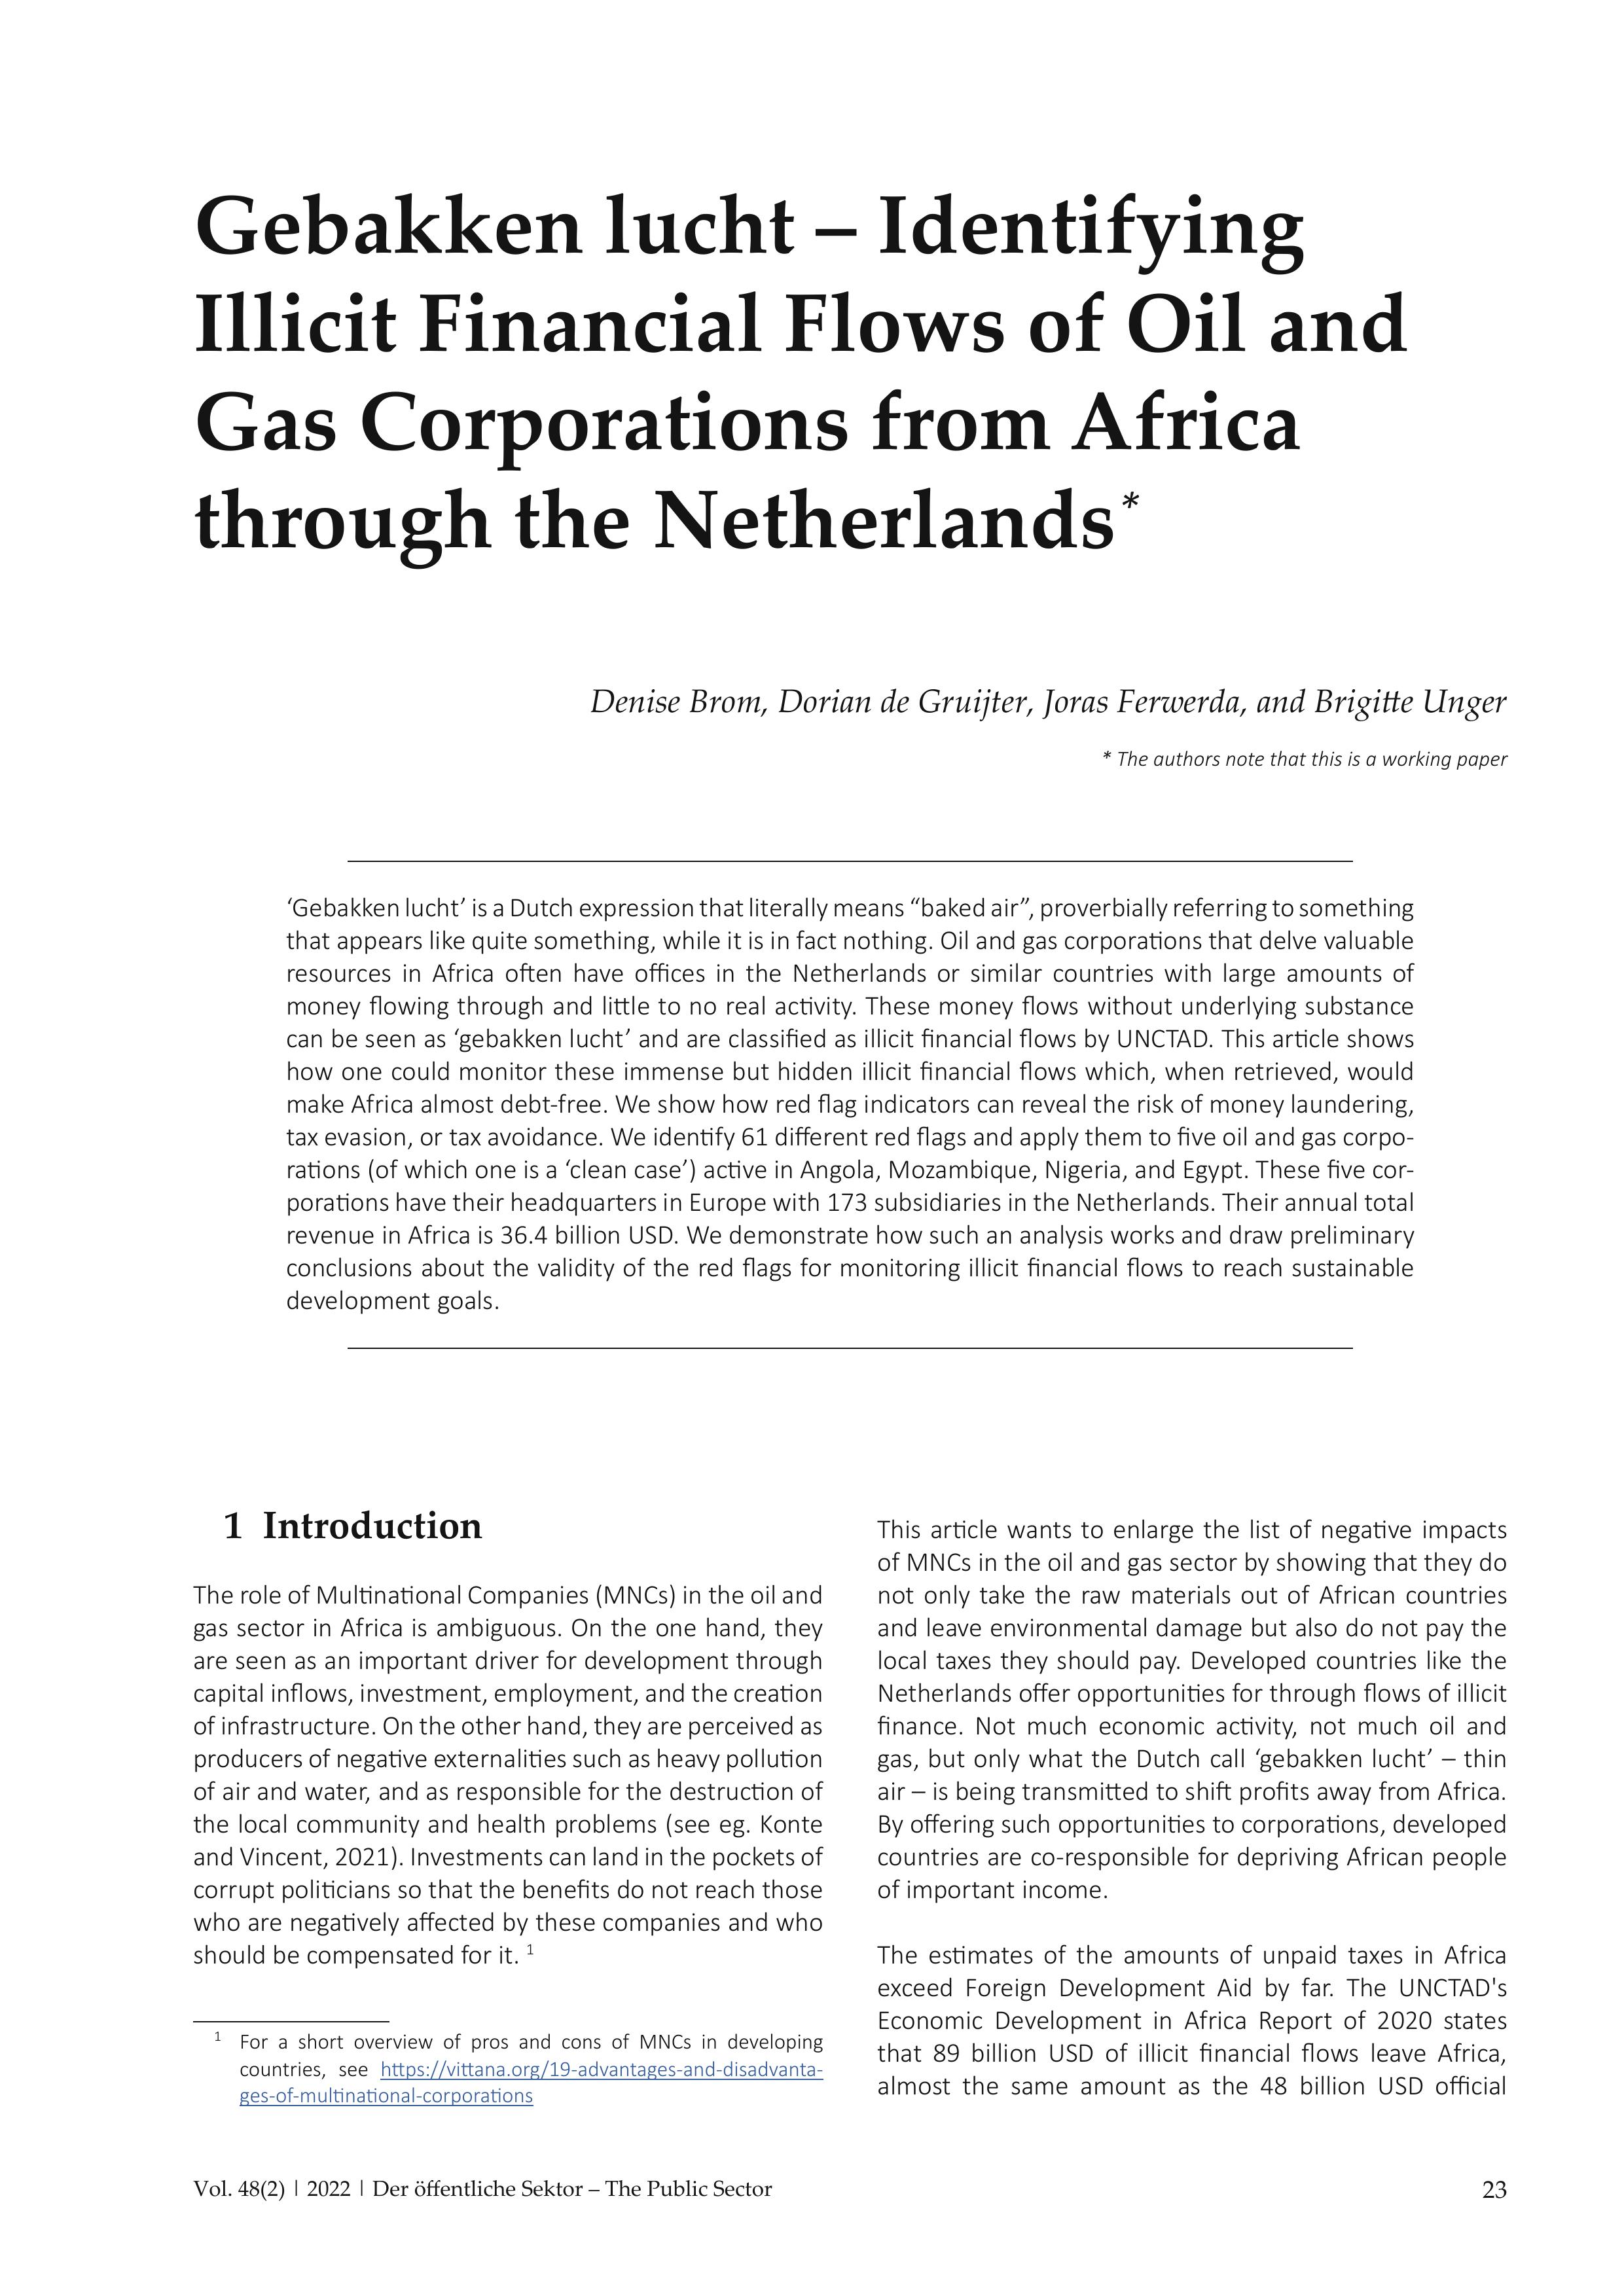 Gebakken lucht – Identifying Illicit Financial Flows of Oil and Gas Corporations from Africa through the Netherlands